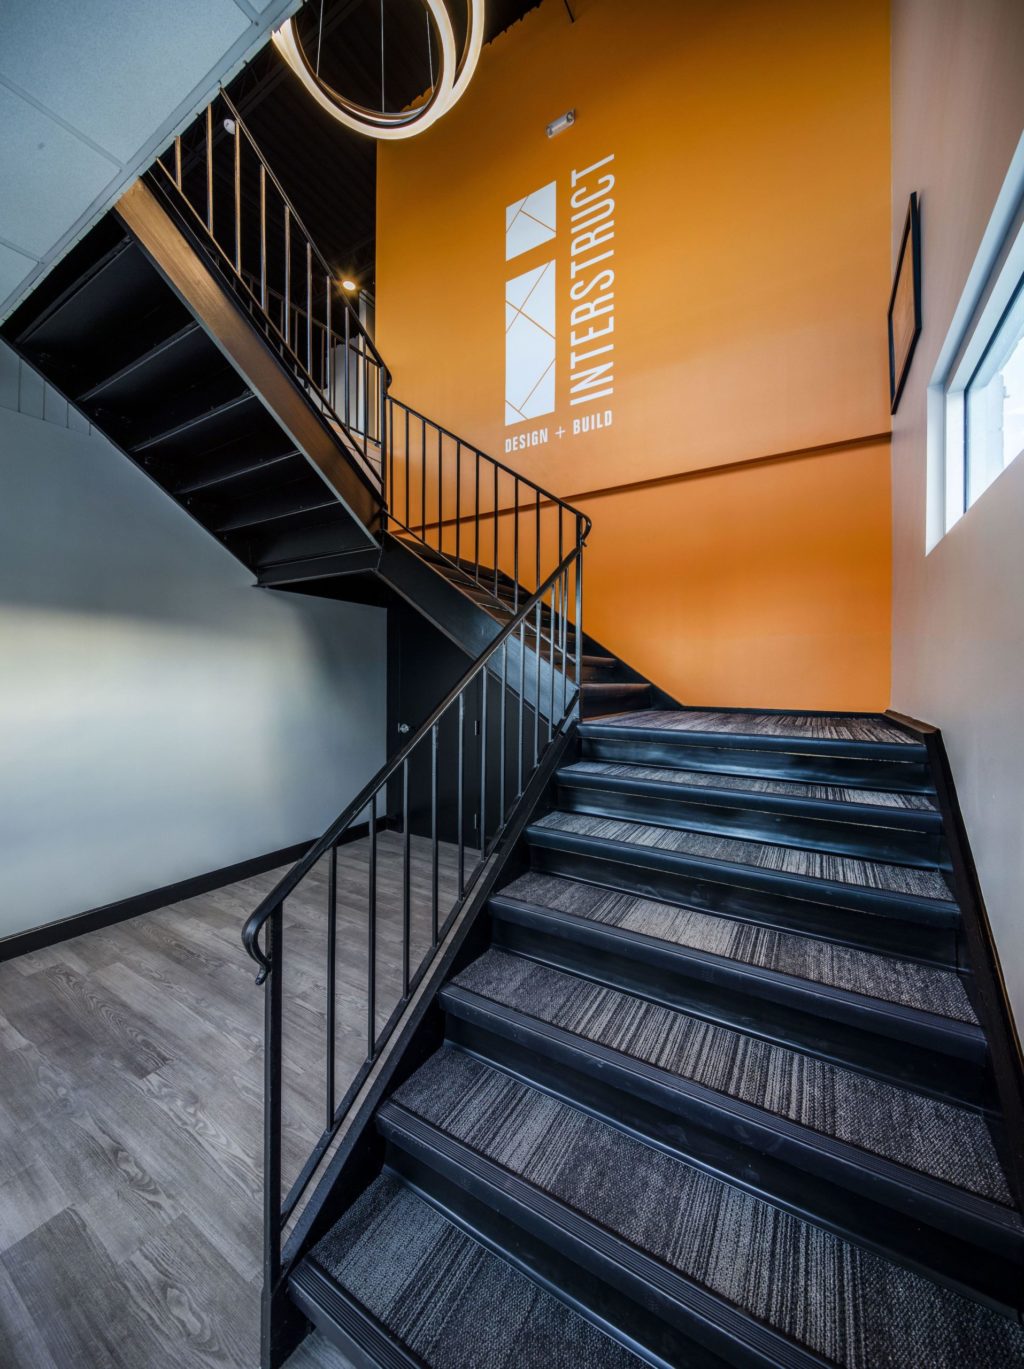 Split stairwell with large orange wall featuring signage for Interstruct Design + Build.